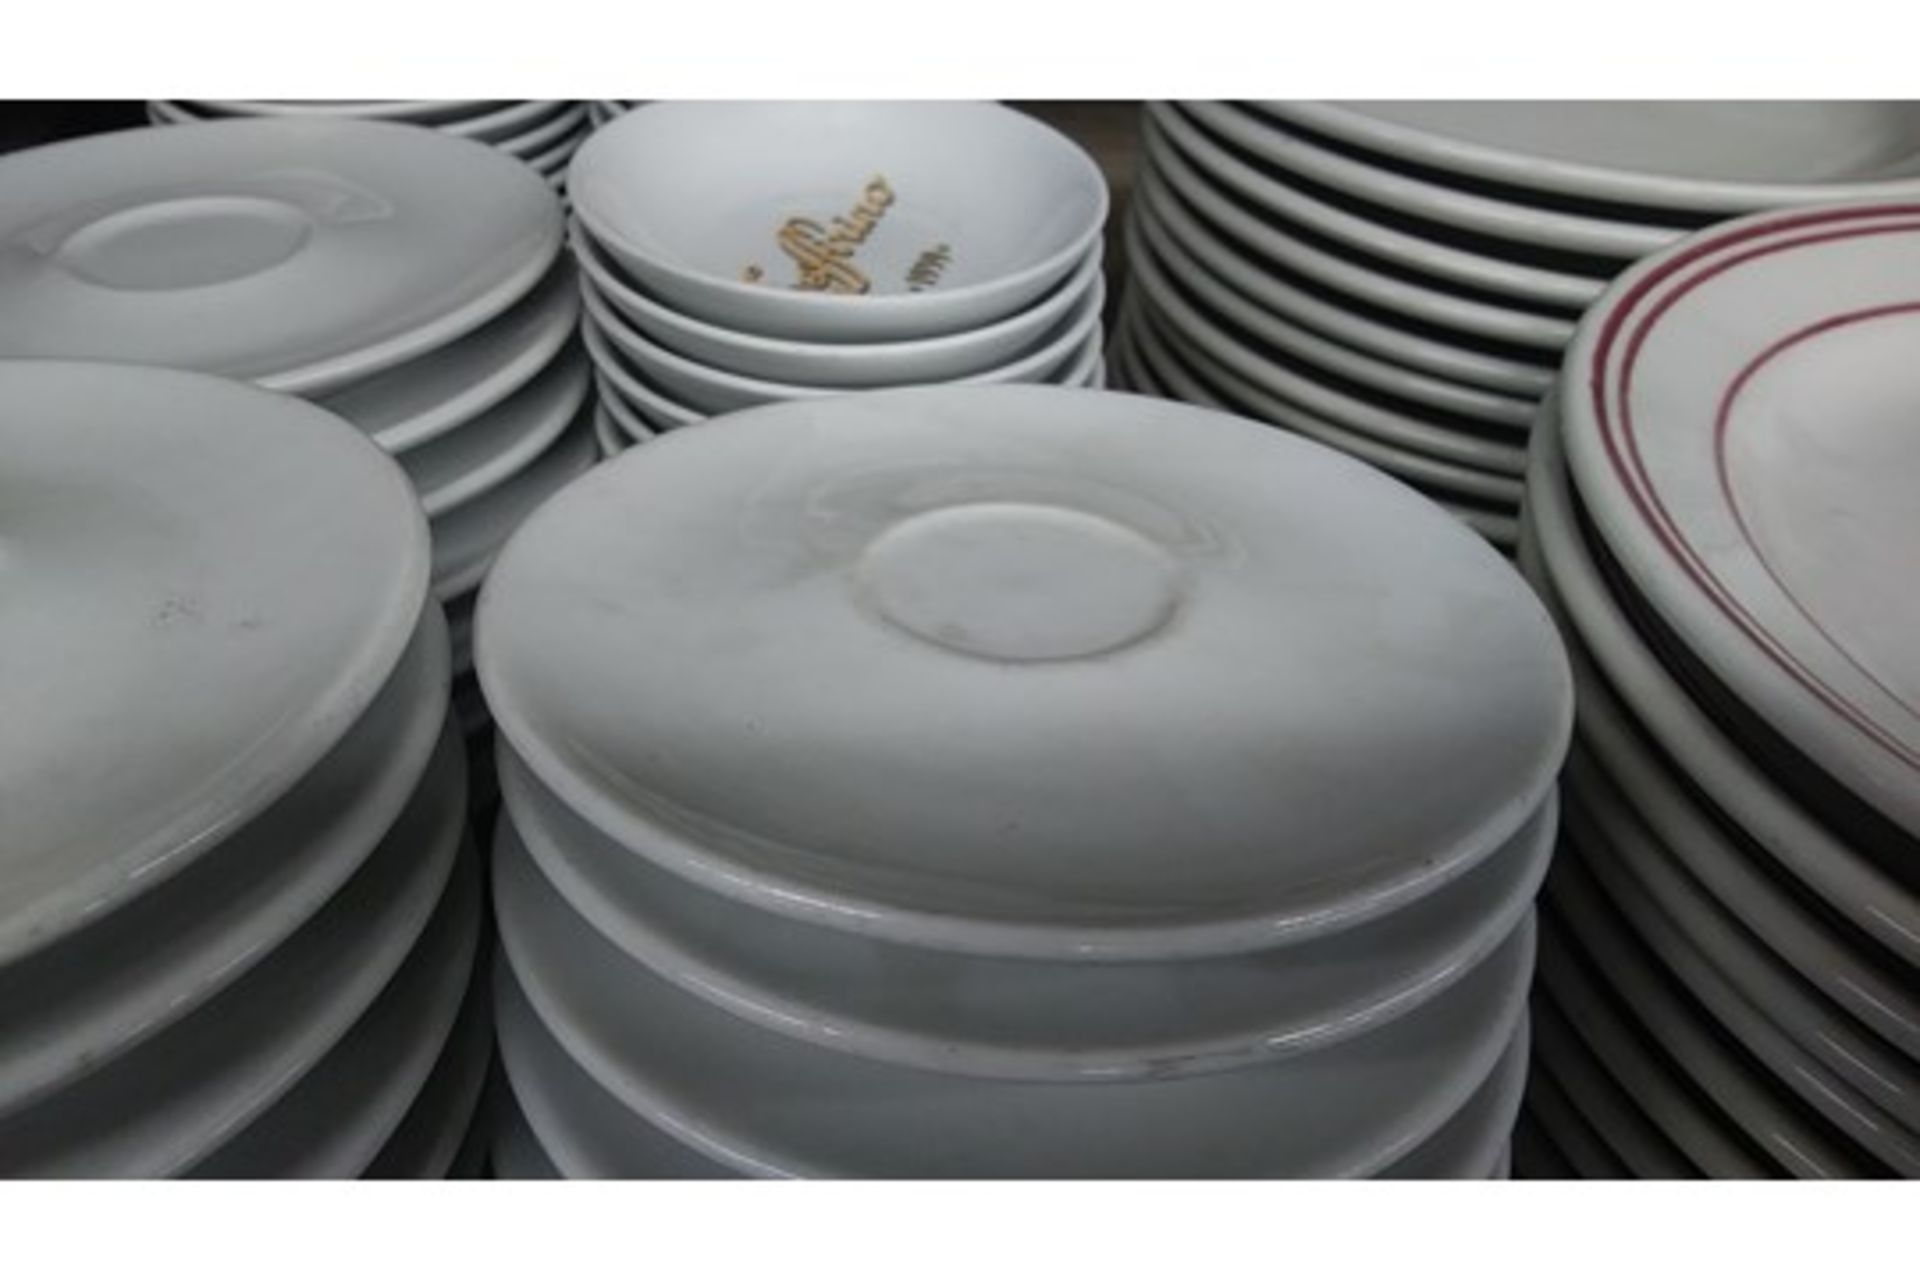 5" STEELITE SAUCER (includes approx QTY 43 in this lot) - Image 3 of 3